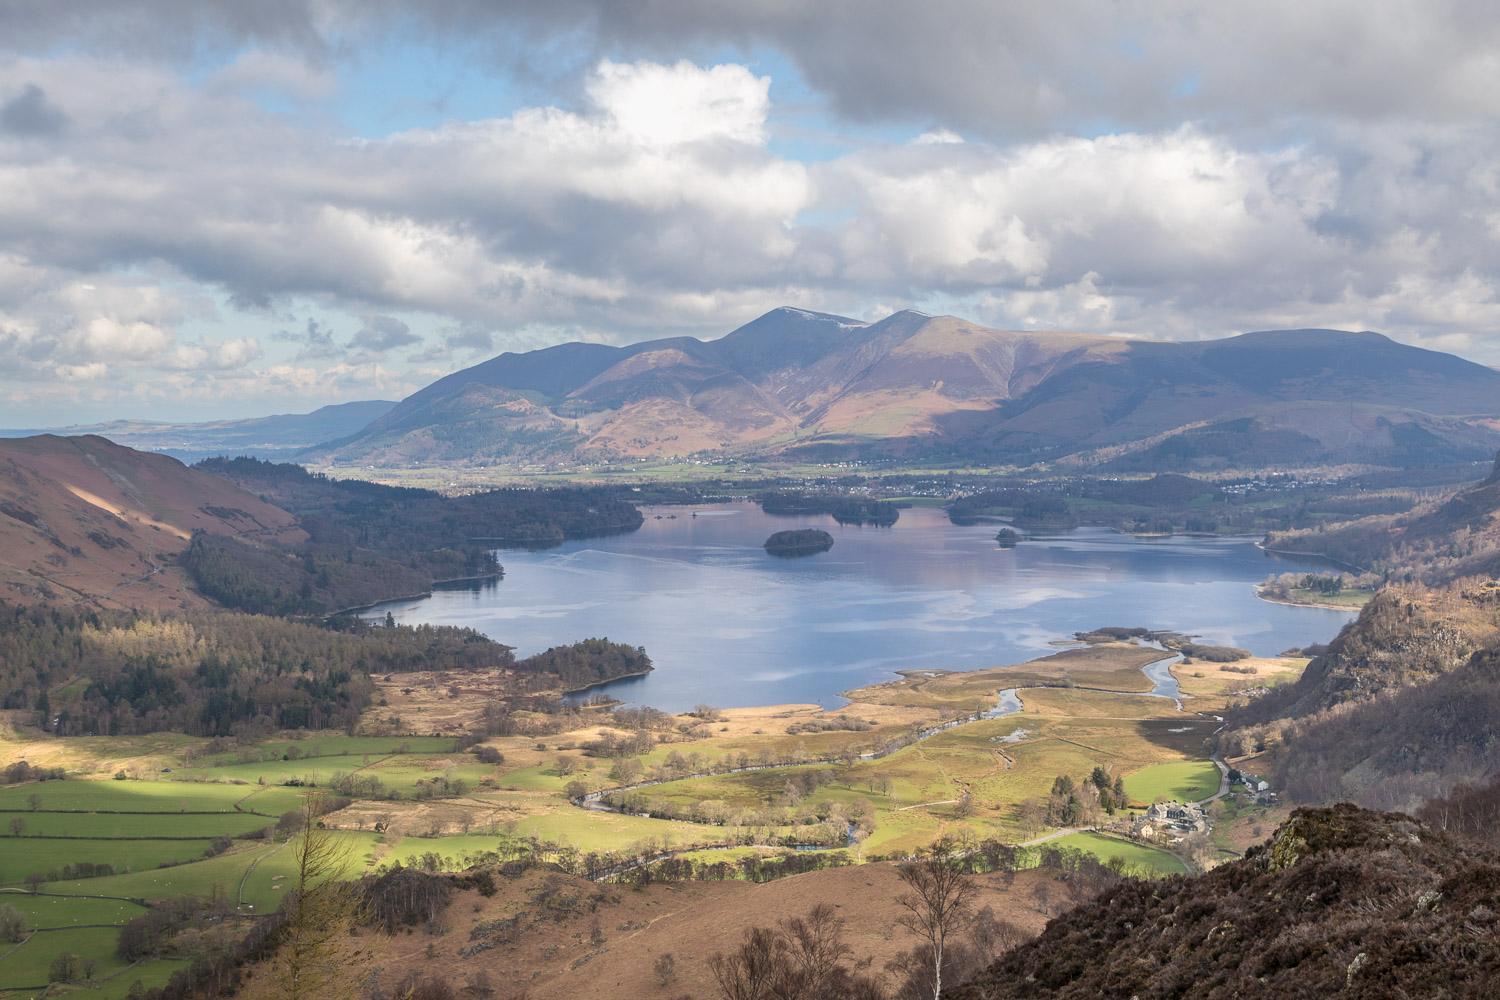 Derwent Water, Keswick and Skiddaw from King's How